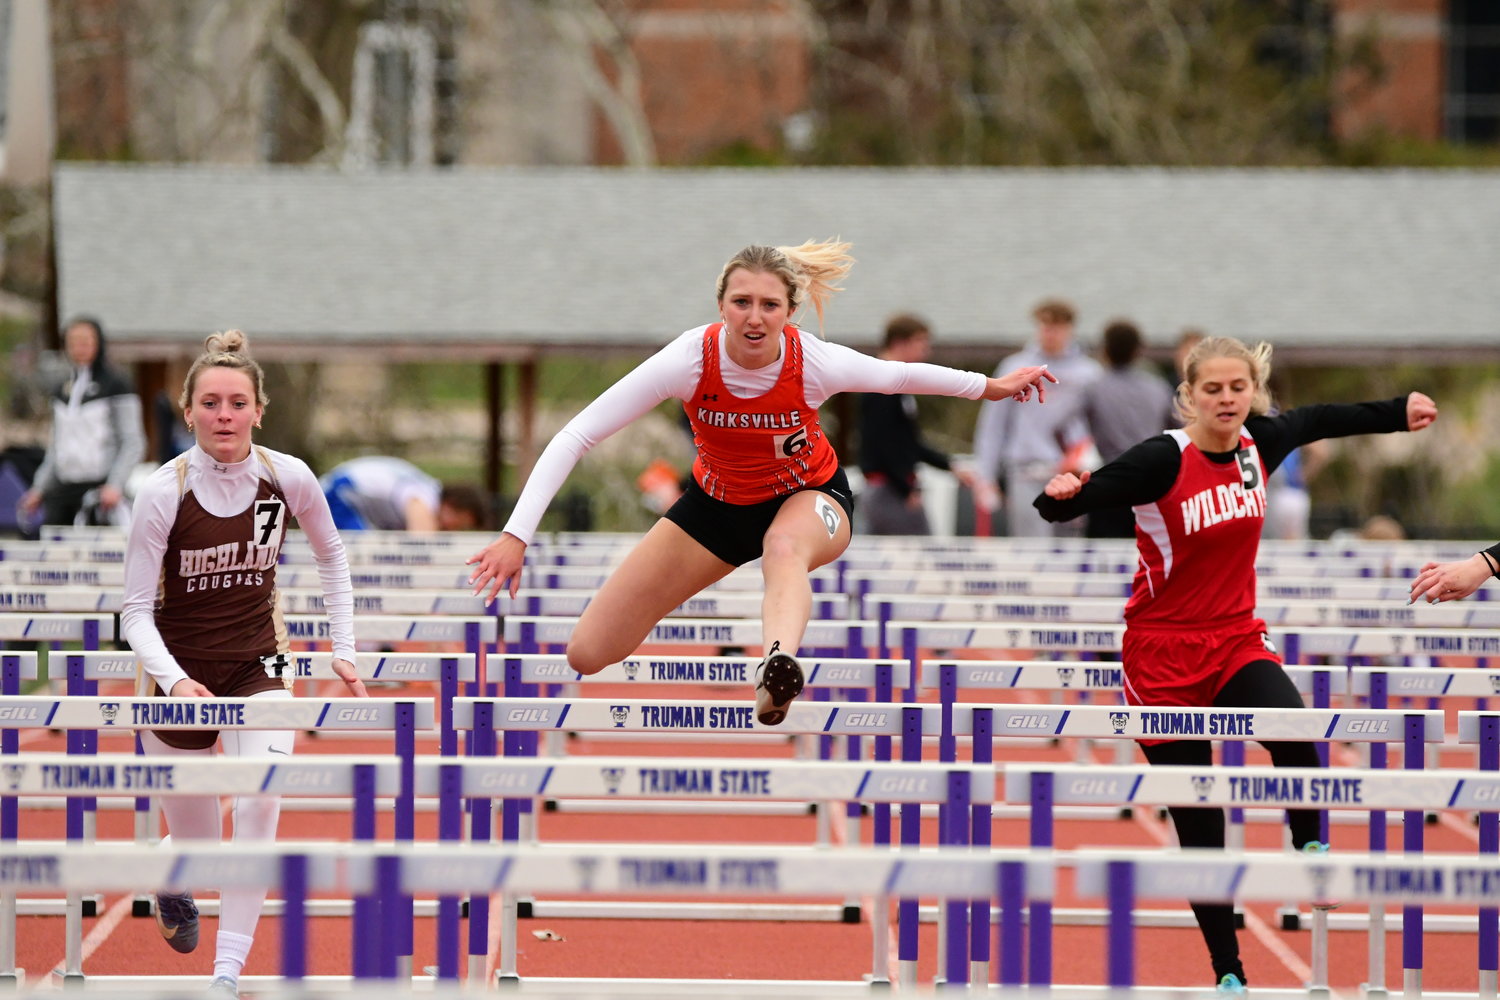 Photos from the 2022 Truman State High School invitational track meet.